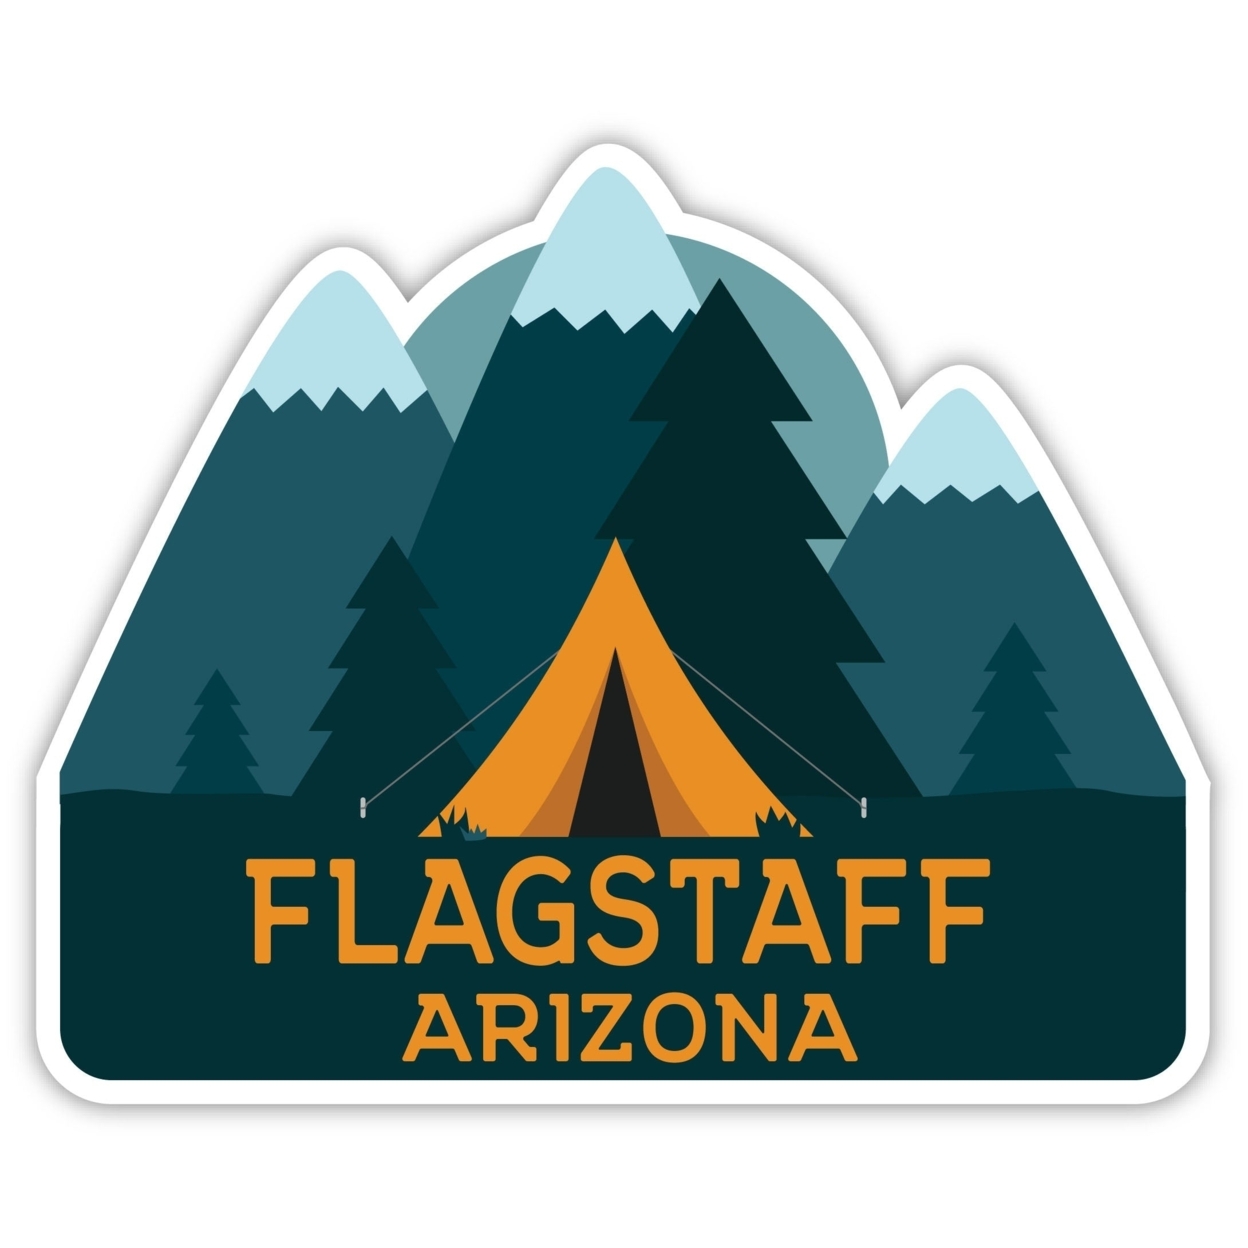 Flagstaff Arizona Souvenir Decorative Stickers (Choose Theme And Size) - 4-Pack, 6-Inch, Tent